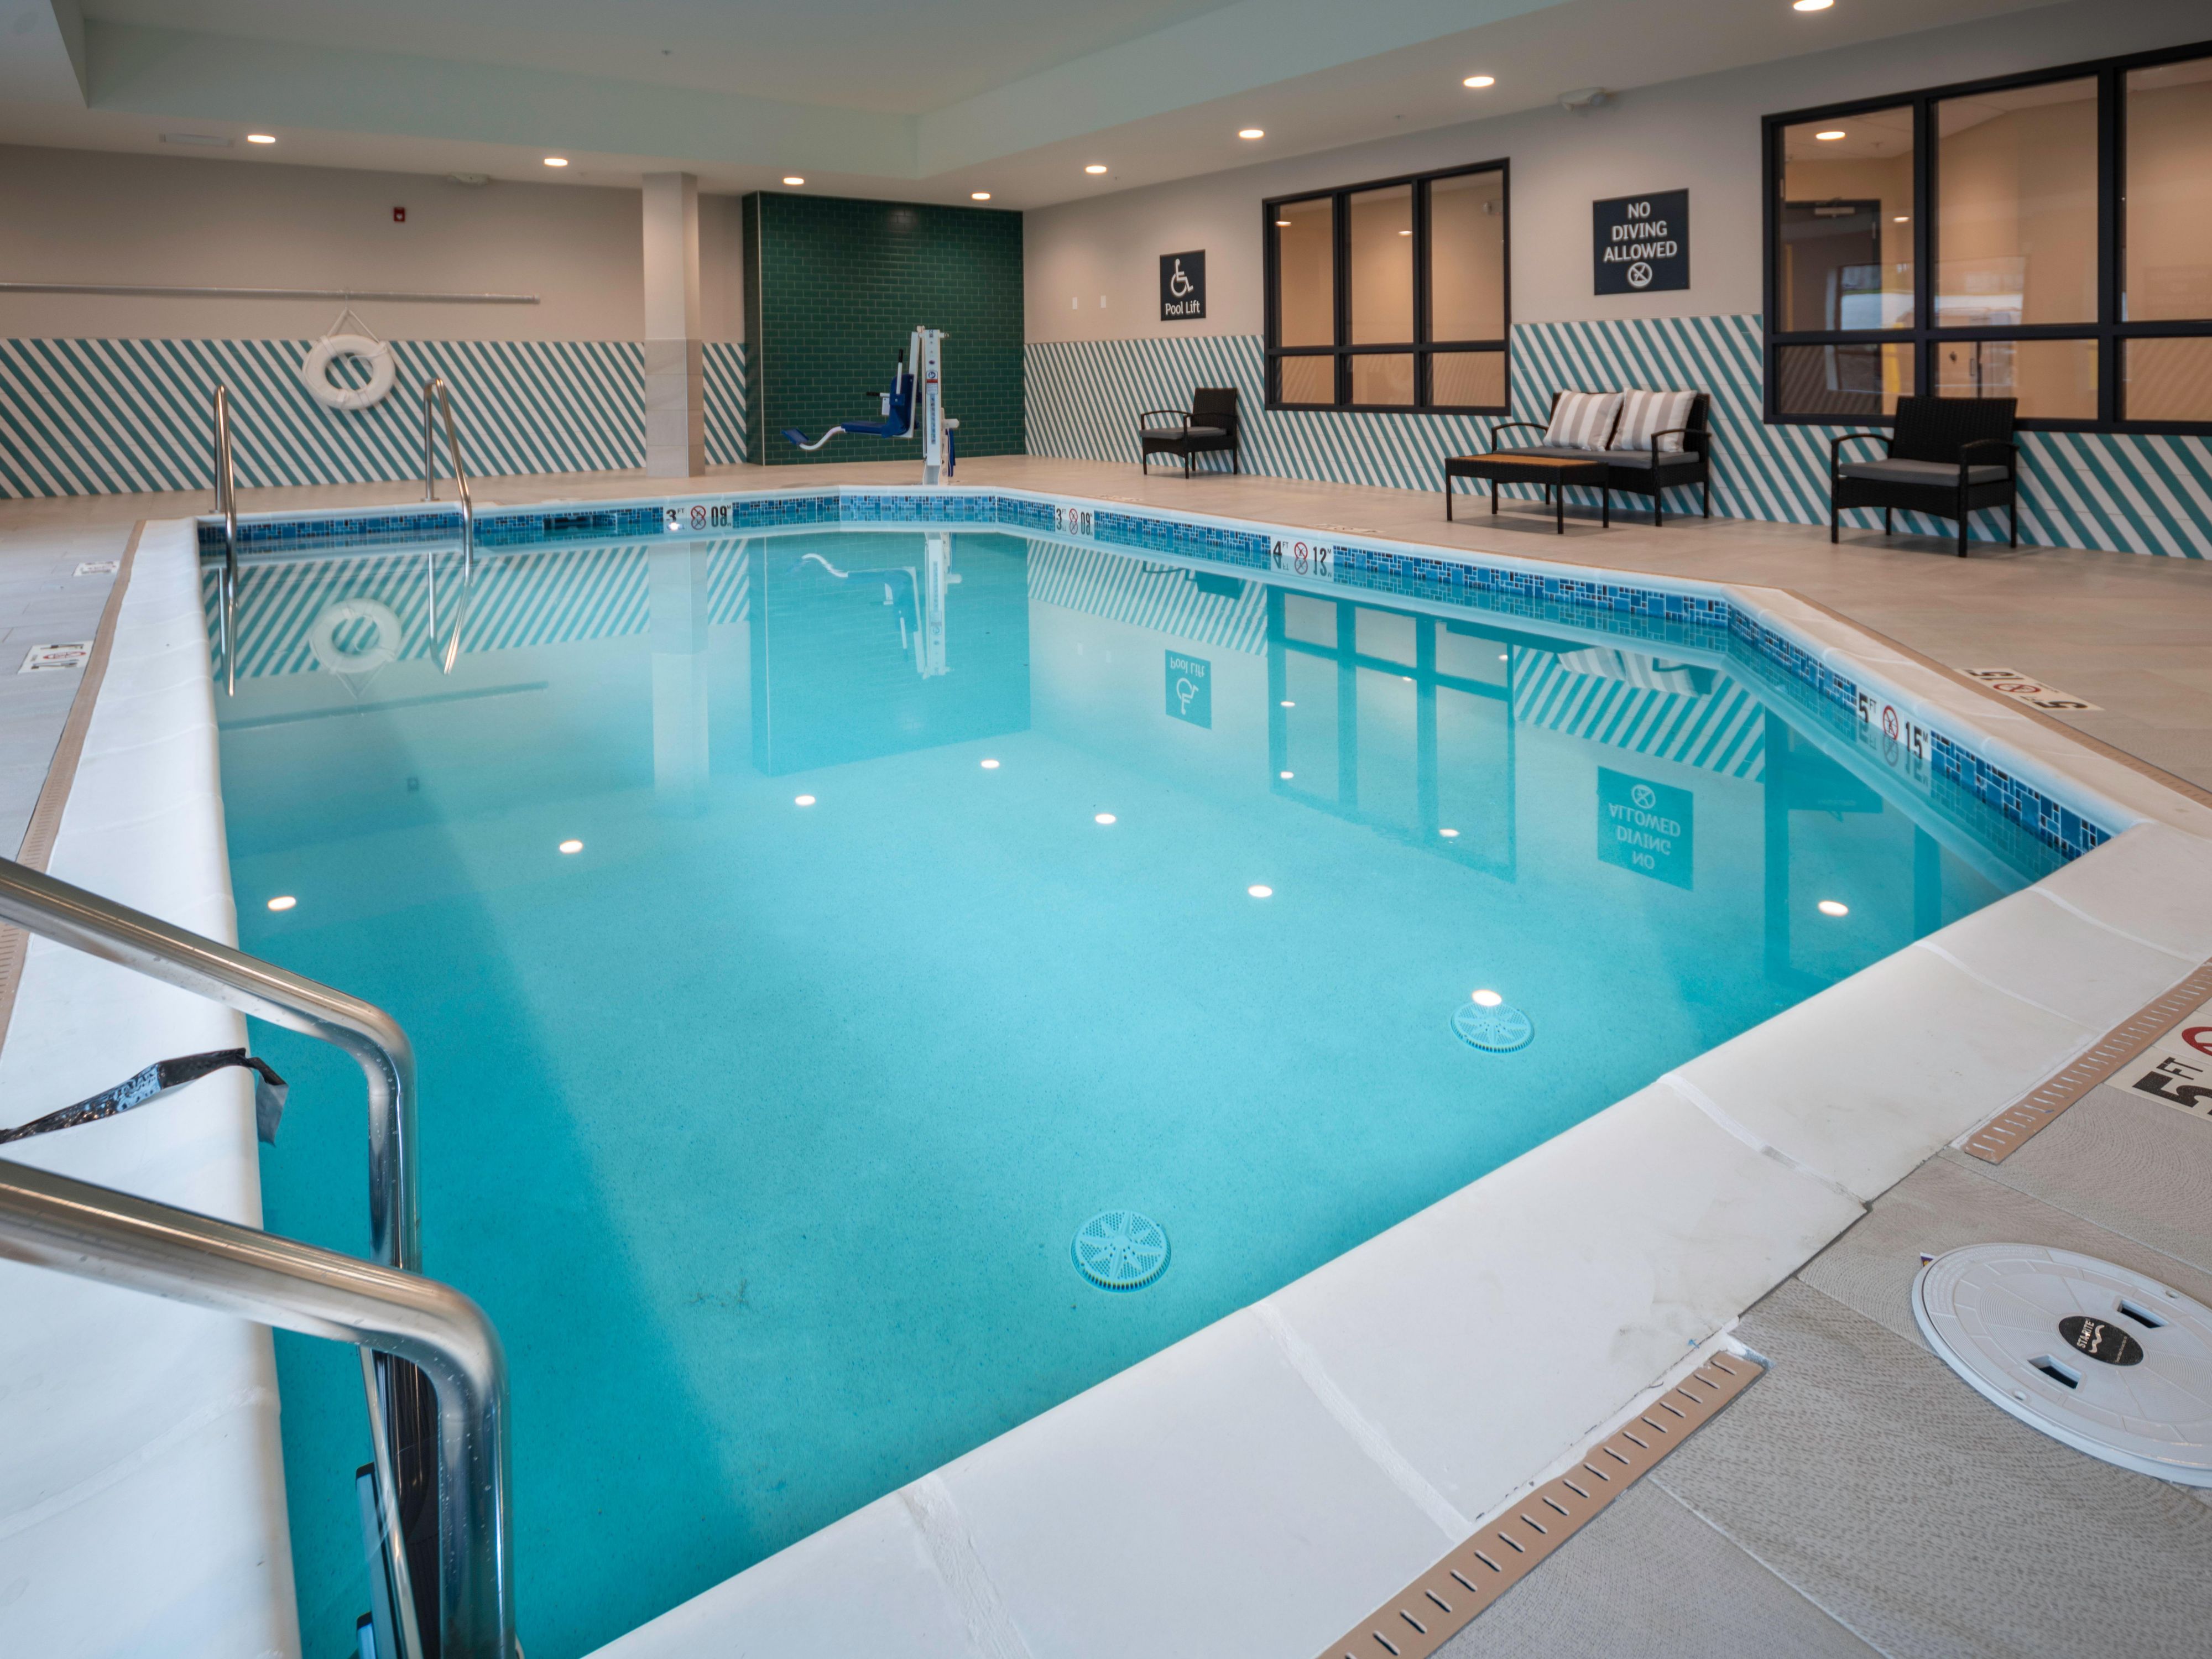 Inn holiday pool express hotel ohio tiffin review swimming miller dan jun comments also there